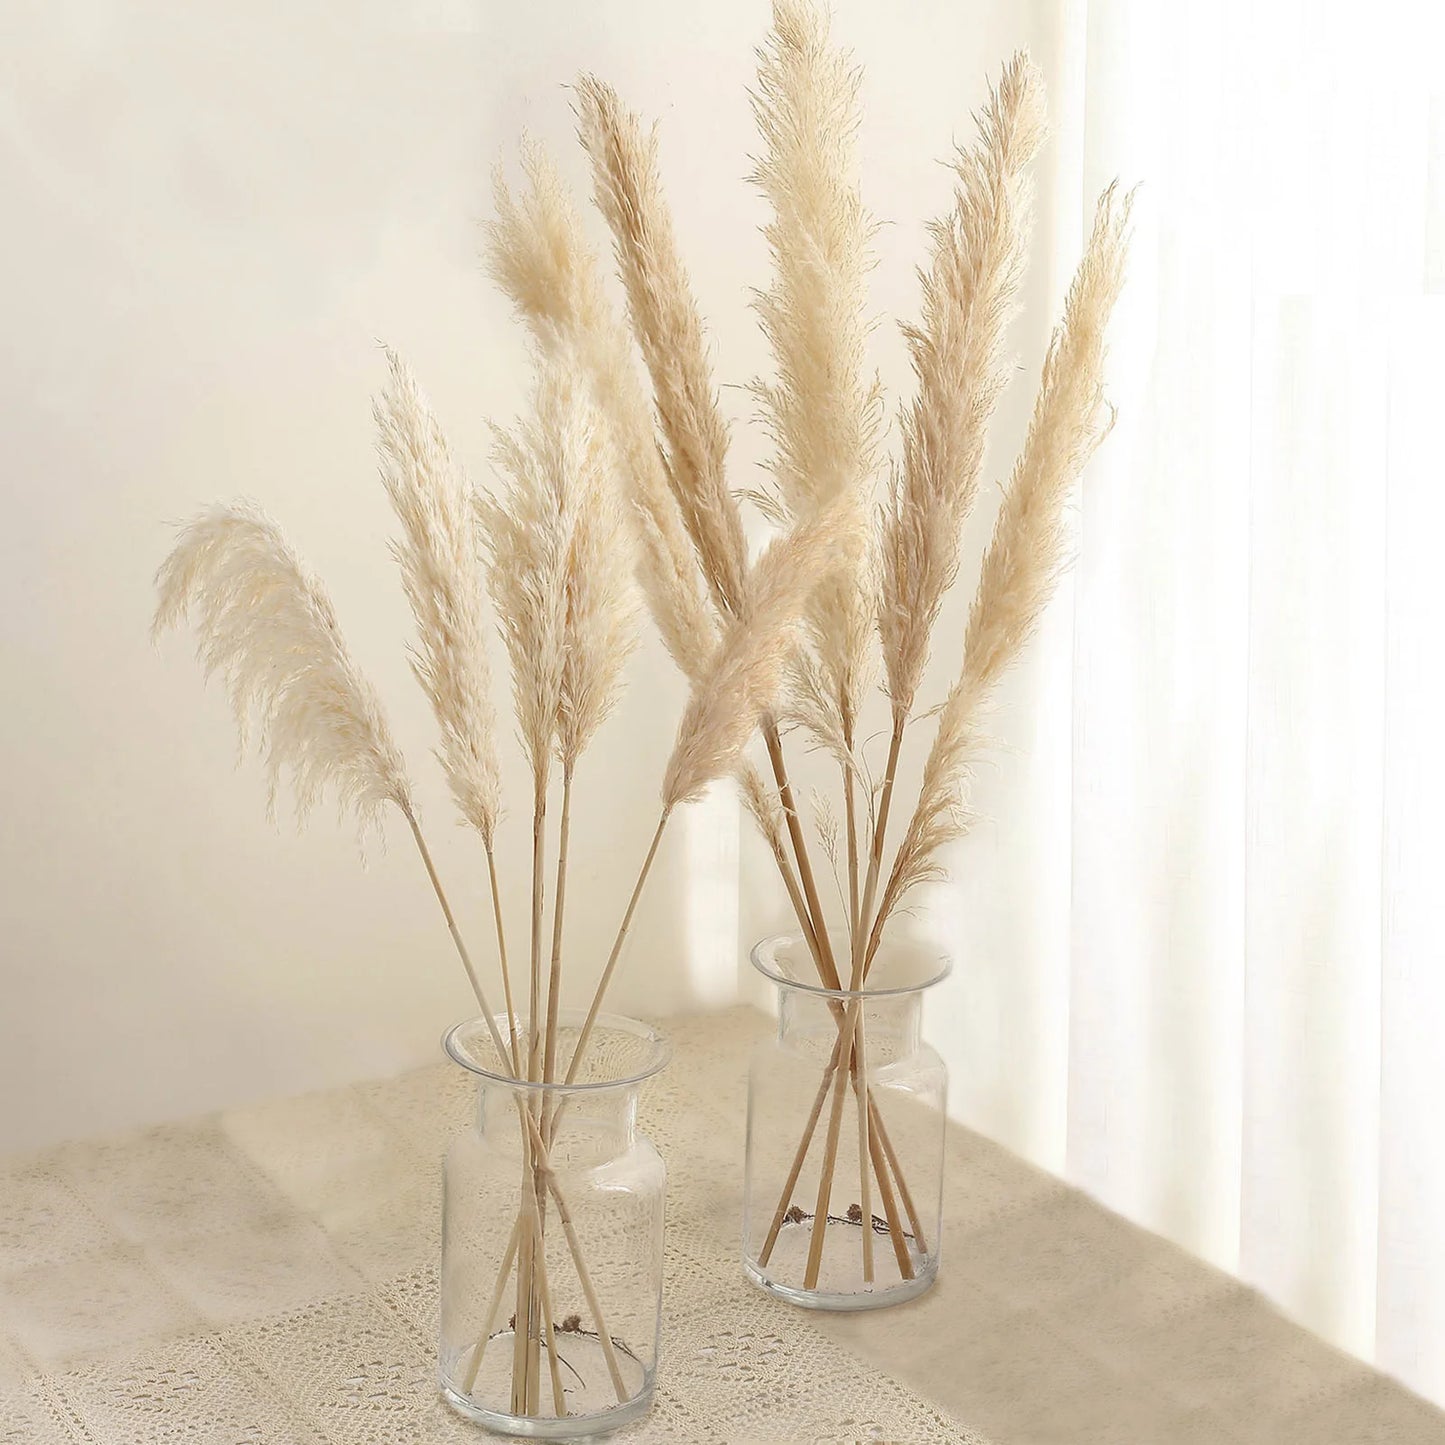 Pampas Grass - white, wheat or natural